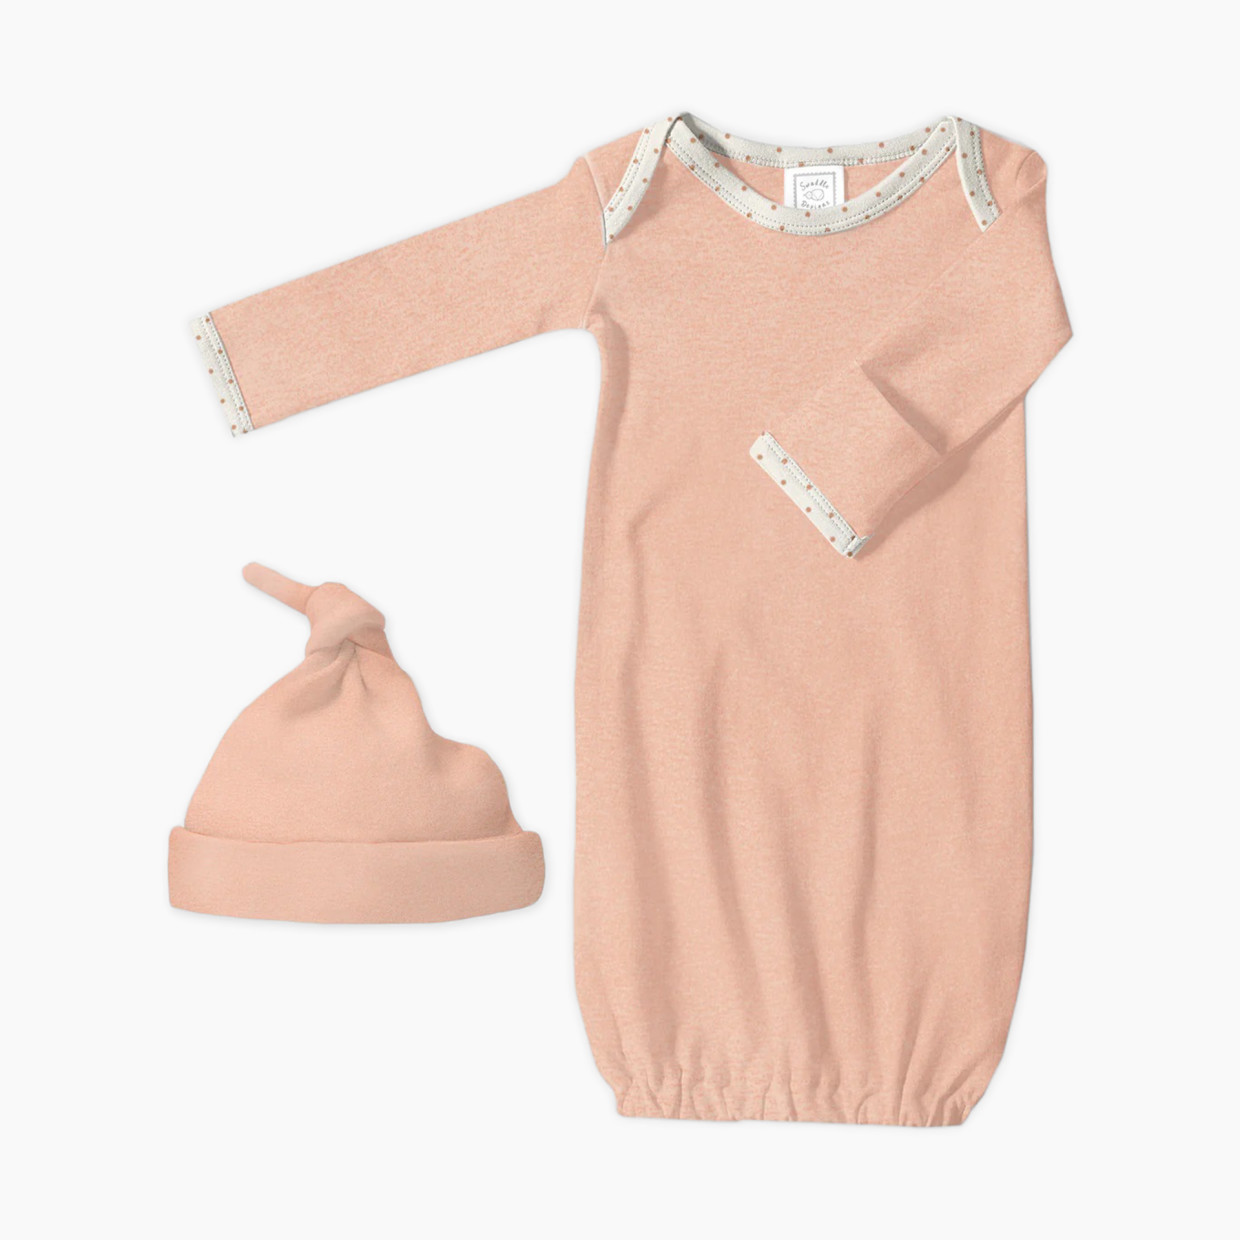 SwaddleDesigns Cotton Knit Long-sleeve Pajama Gown with Mitten Cuffs and Knotted Hat - Heathered Peach Blush, Newborn (0-3 Months).